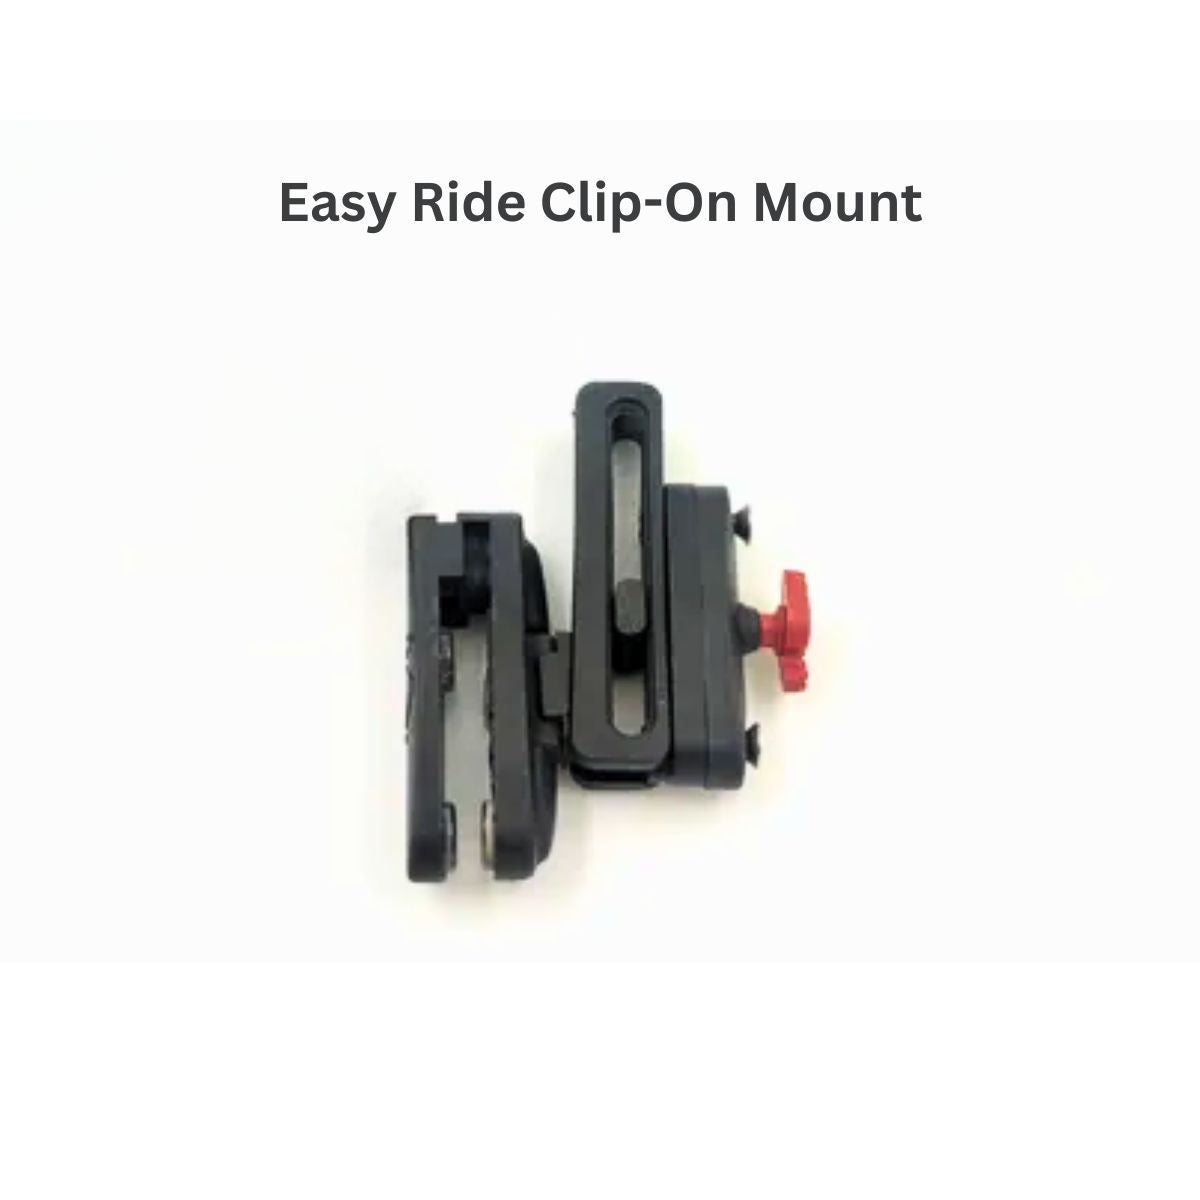 Easy Ride Clip-On Windshield Extender for Yezdi 3